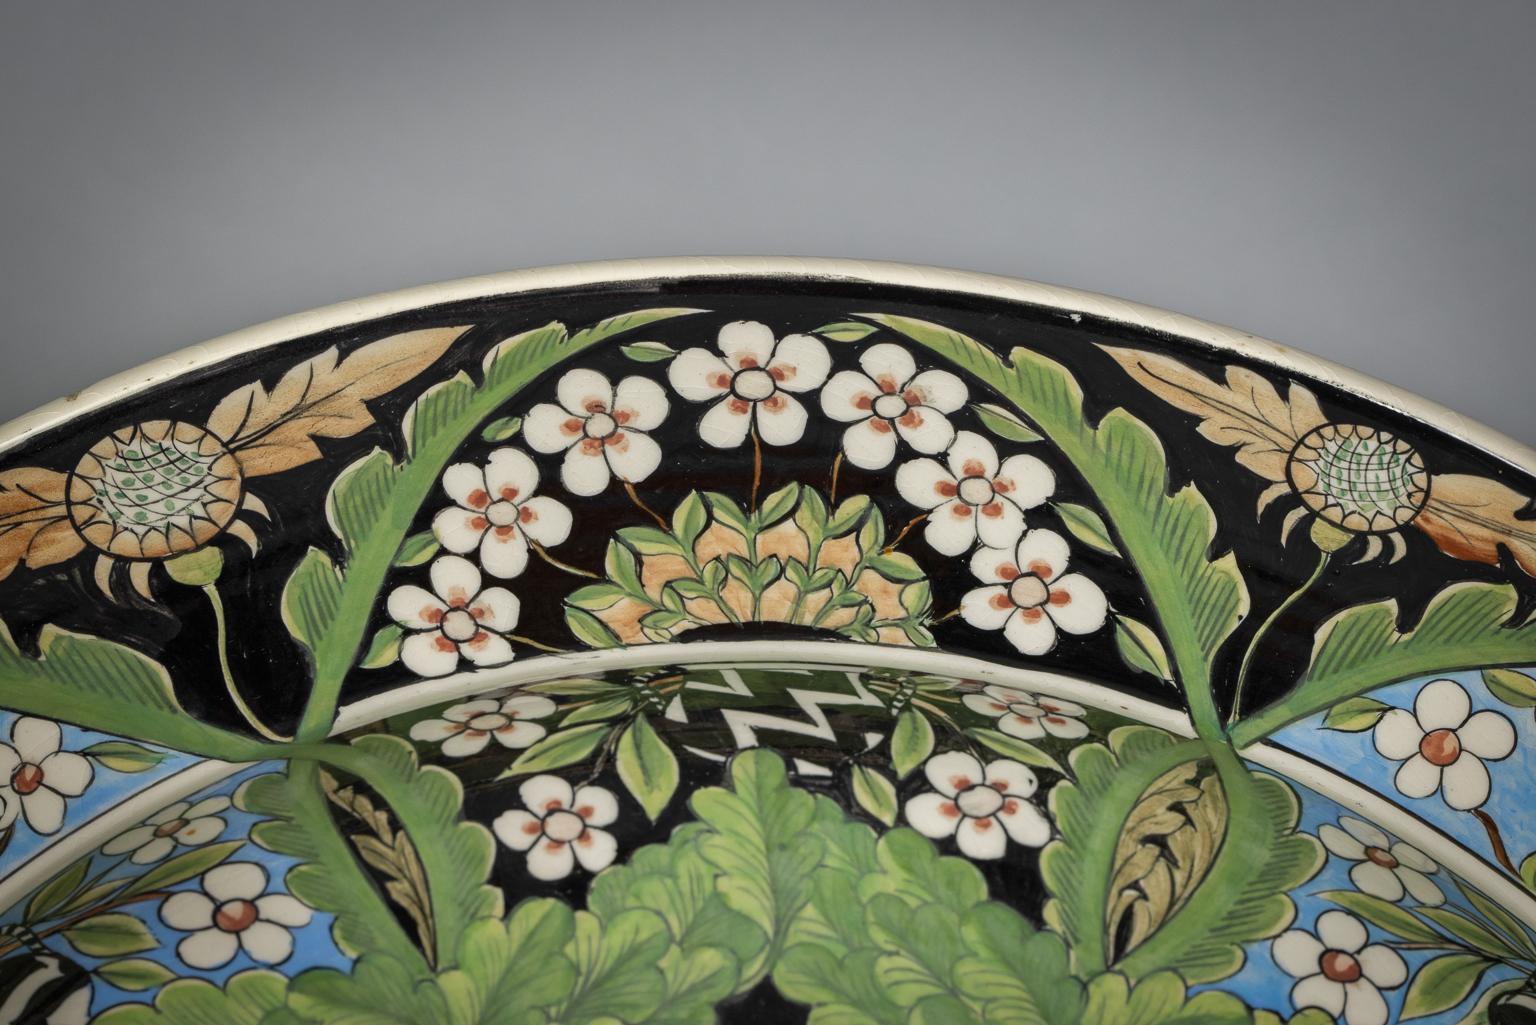 Each painted in the center with either an owl or a peacock roundel, within a band of exotic and woodland animals amongst oak trees, the upper branches of the trees forming arches around the rim enclosing eight panels of flower-filled vases on an